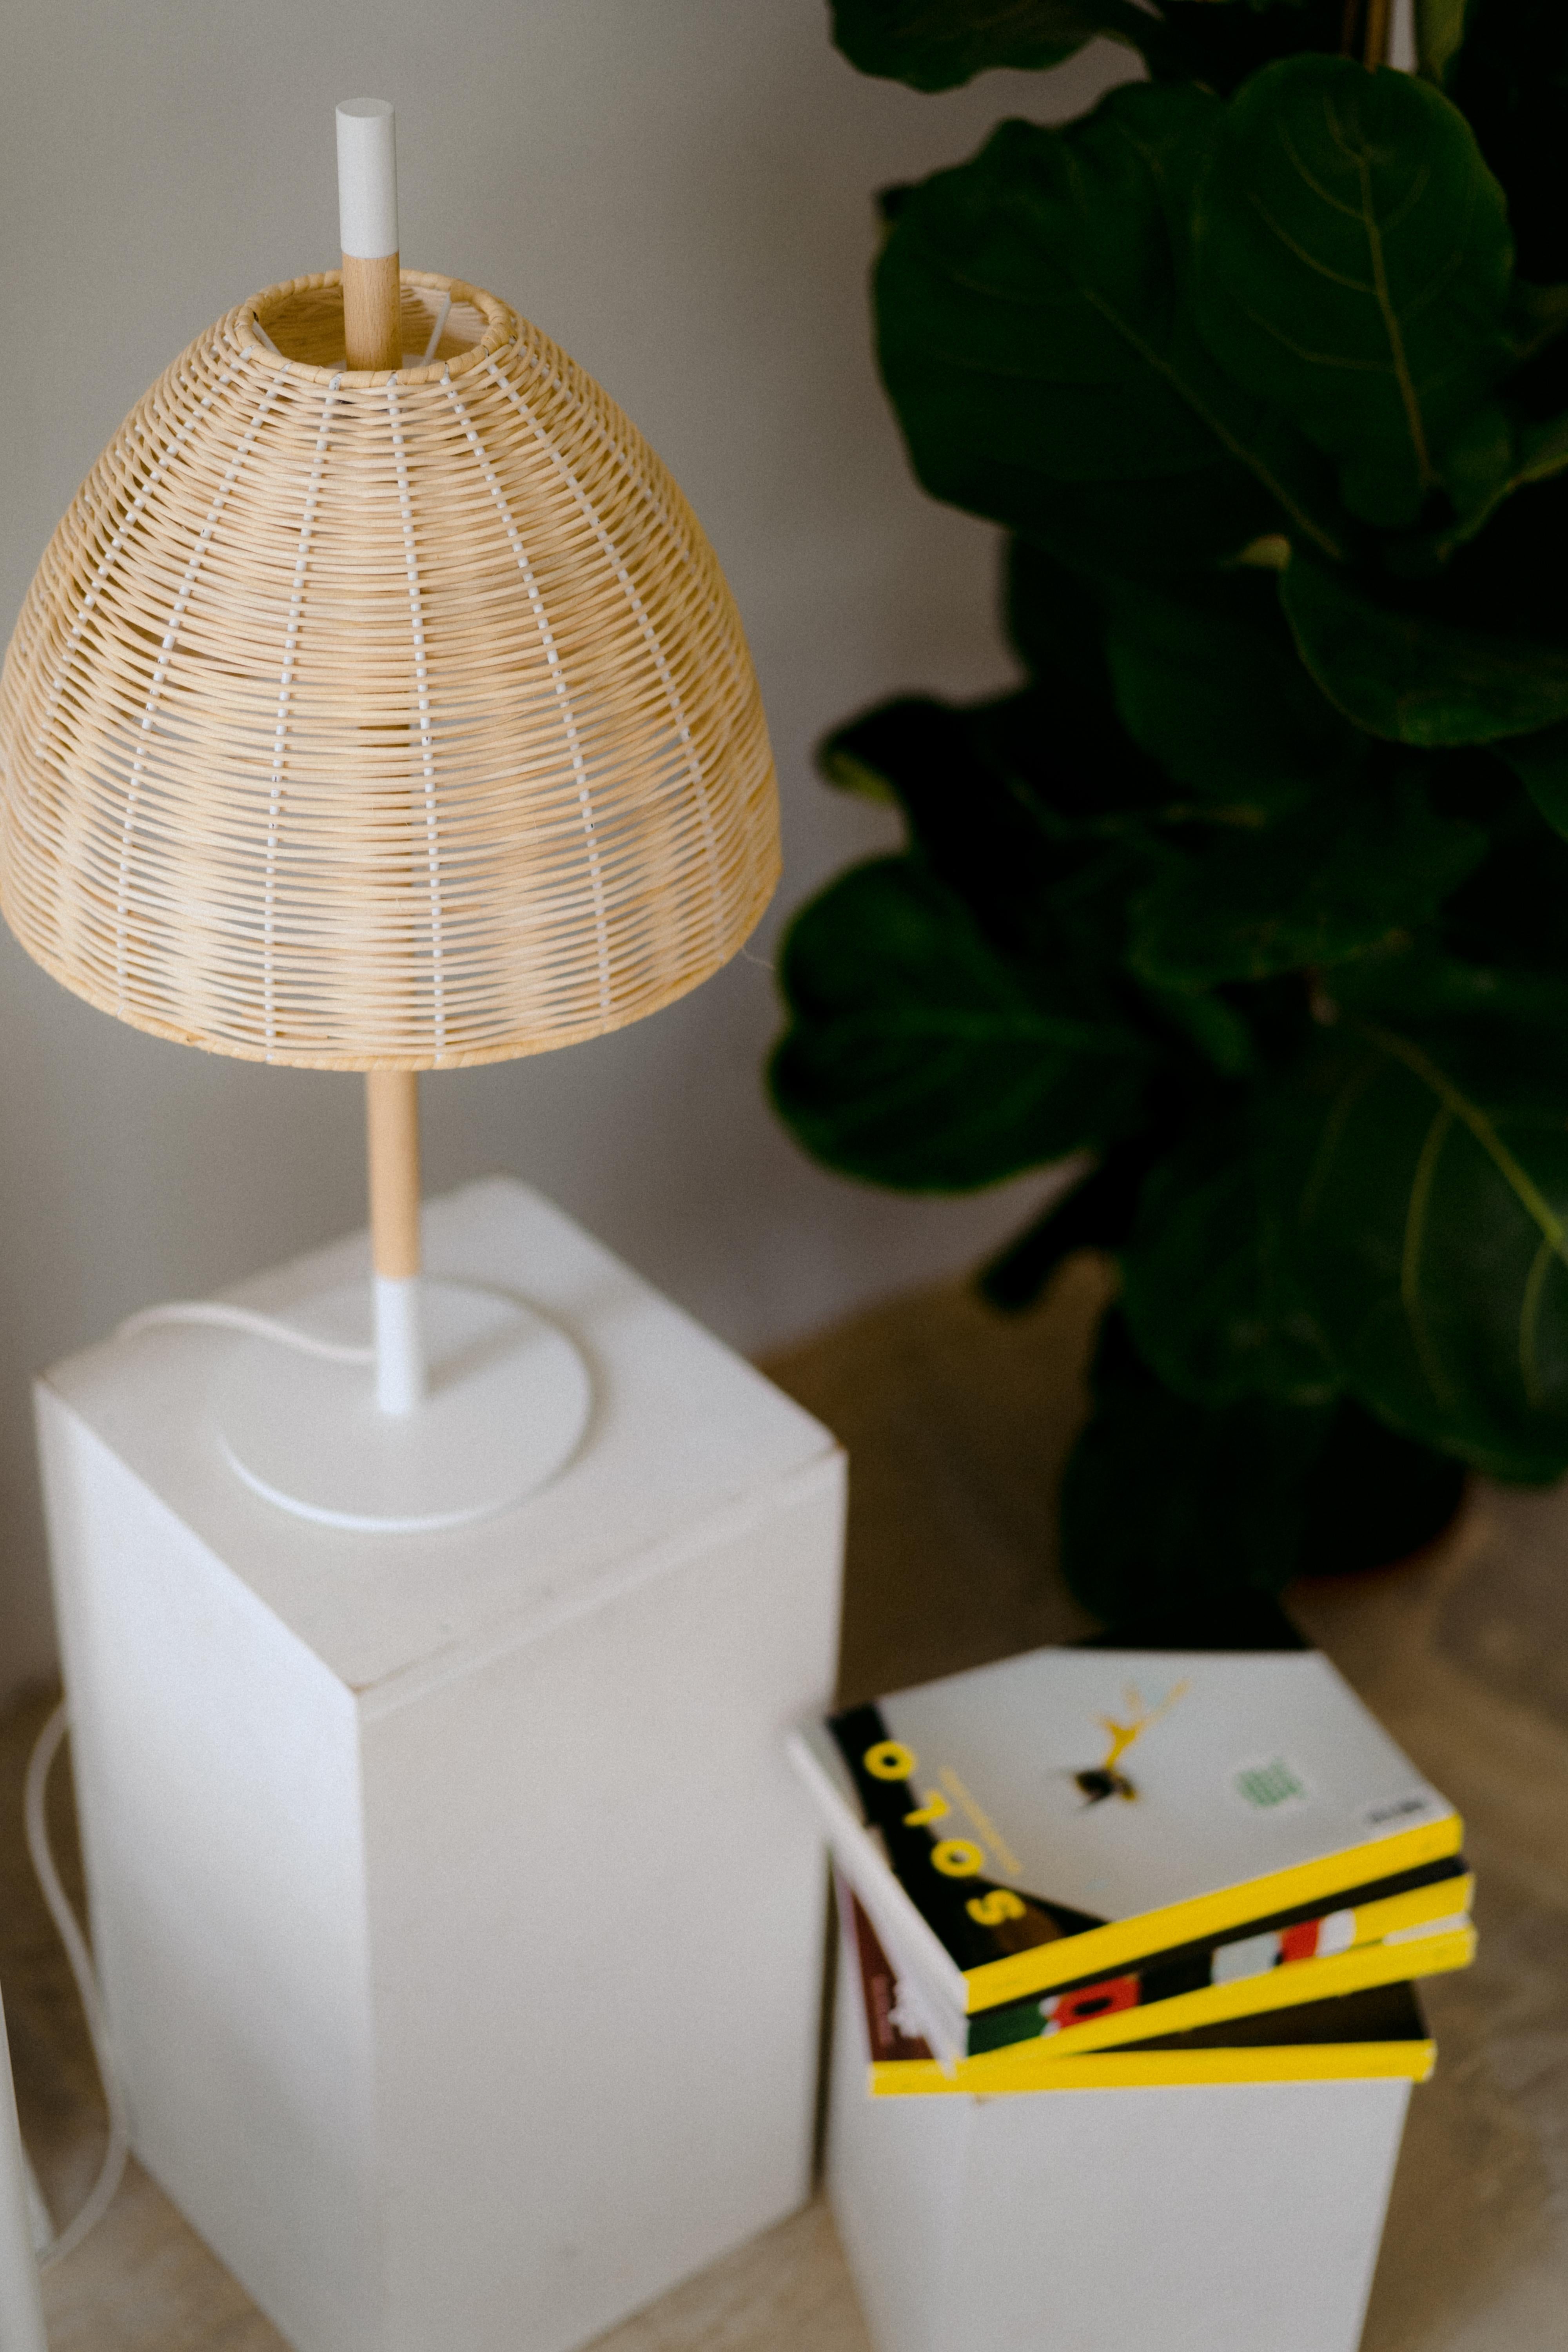 AMA - Table lamp
Ama , comes from the Catalan '' a mà '', which means '' handmade '', and it is how this contemporary lamp is made. With hand-turned beech wood, white metal details, and hand-woven lampshade in natural rattan.
Mediterranean, simple,